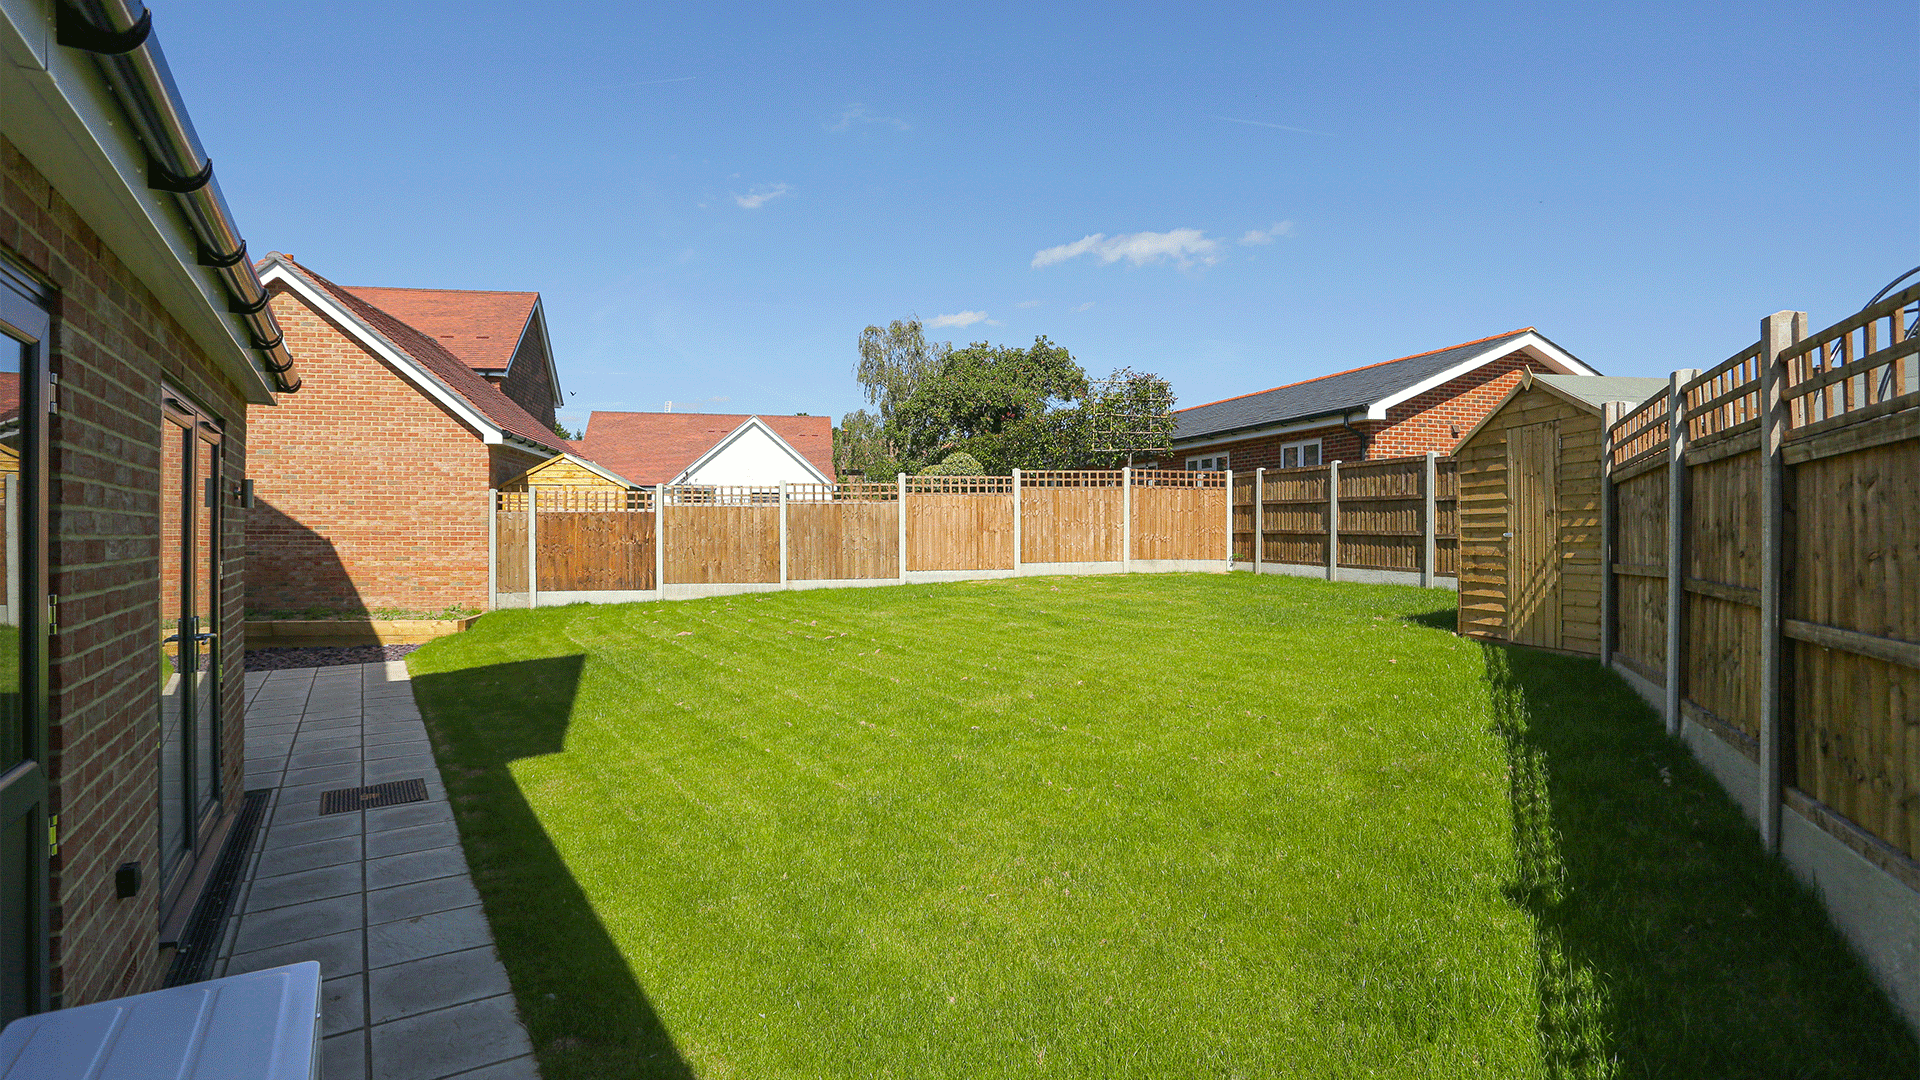 Miller's Meadow - Plot 7 Garden, a bright green turf with a pathway on the left and shed on the right